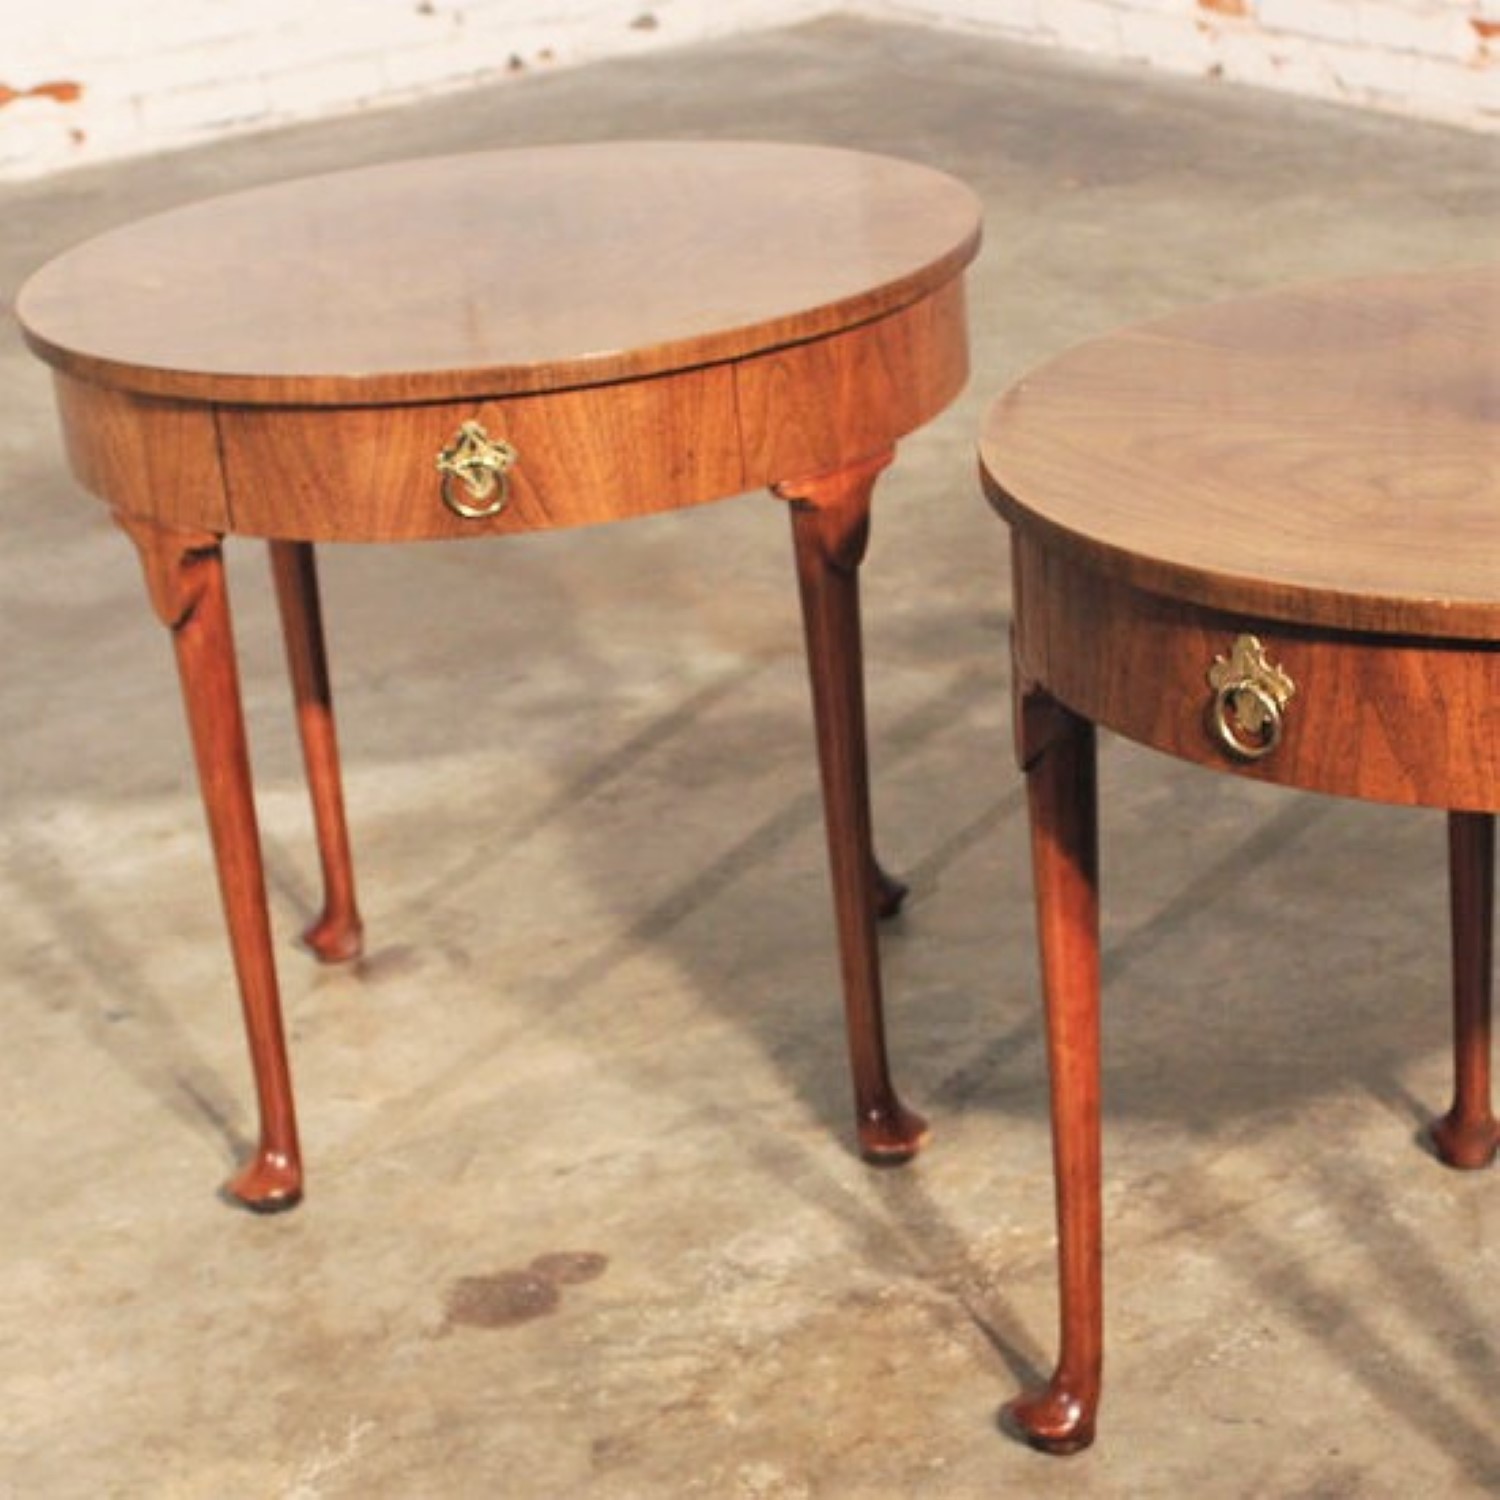 Vintage Pair of Baker Georgian Style Round End Tables from Old World Line